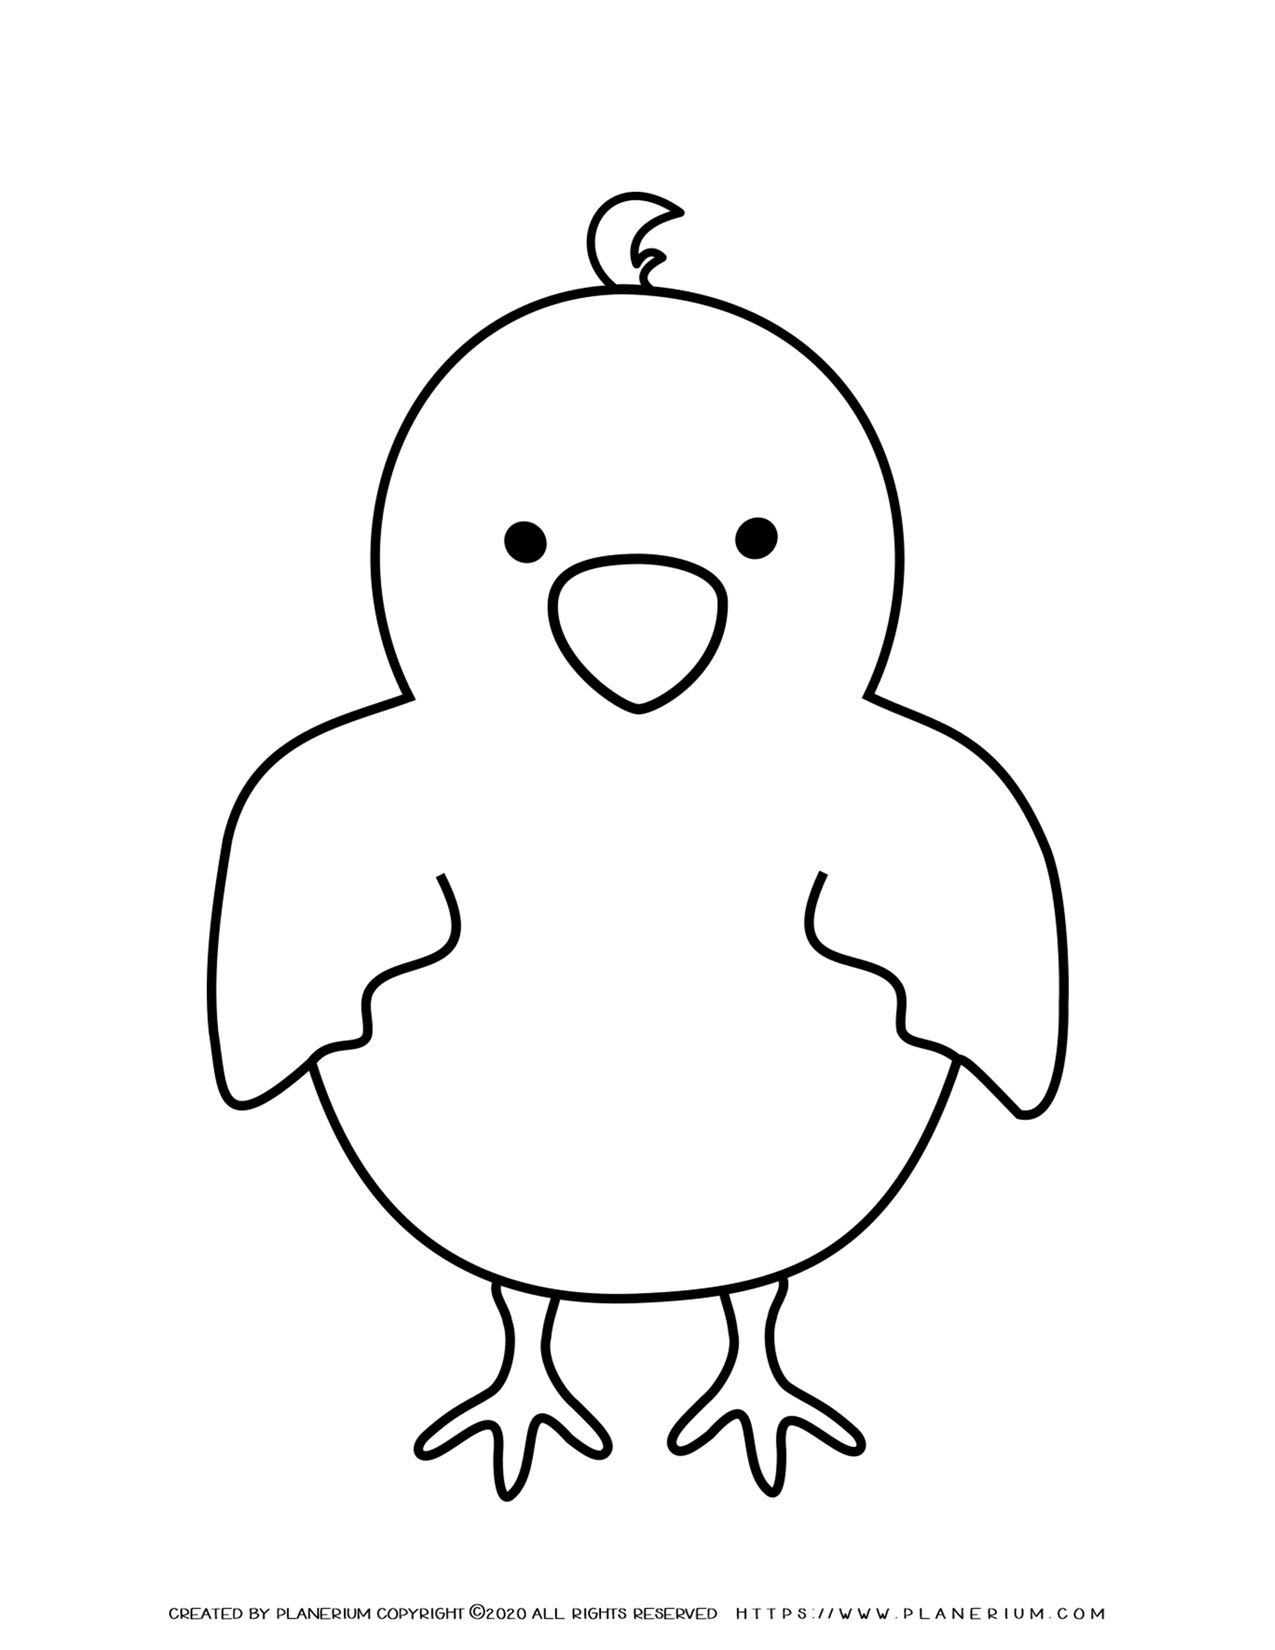 26-best-ideas-for-coloring-baby-chick-coloring-page